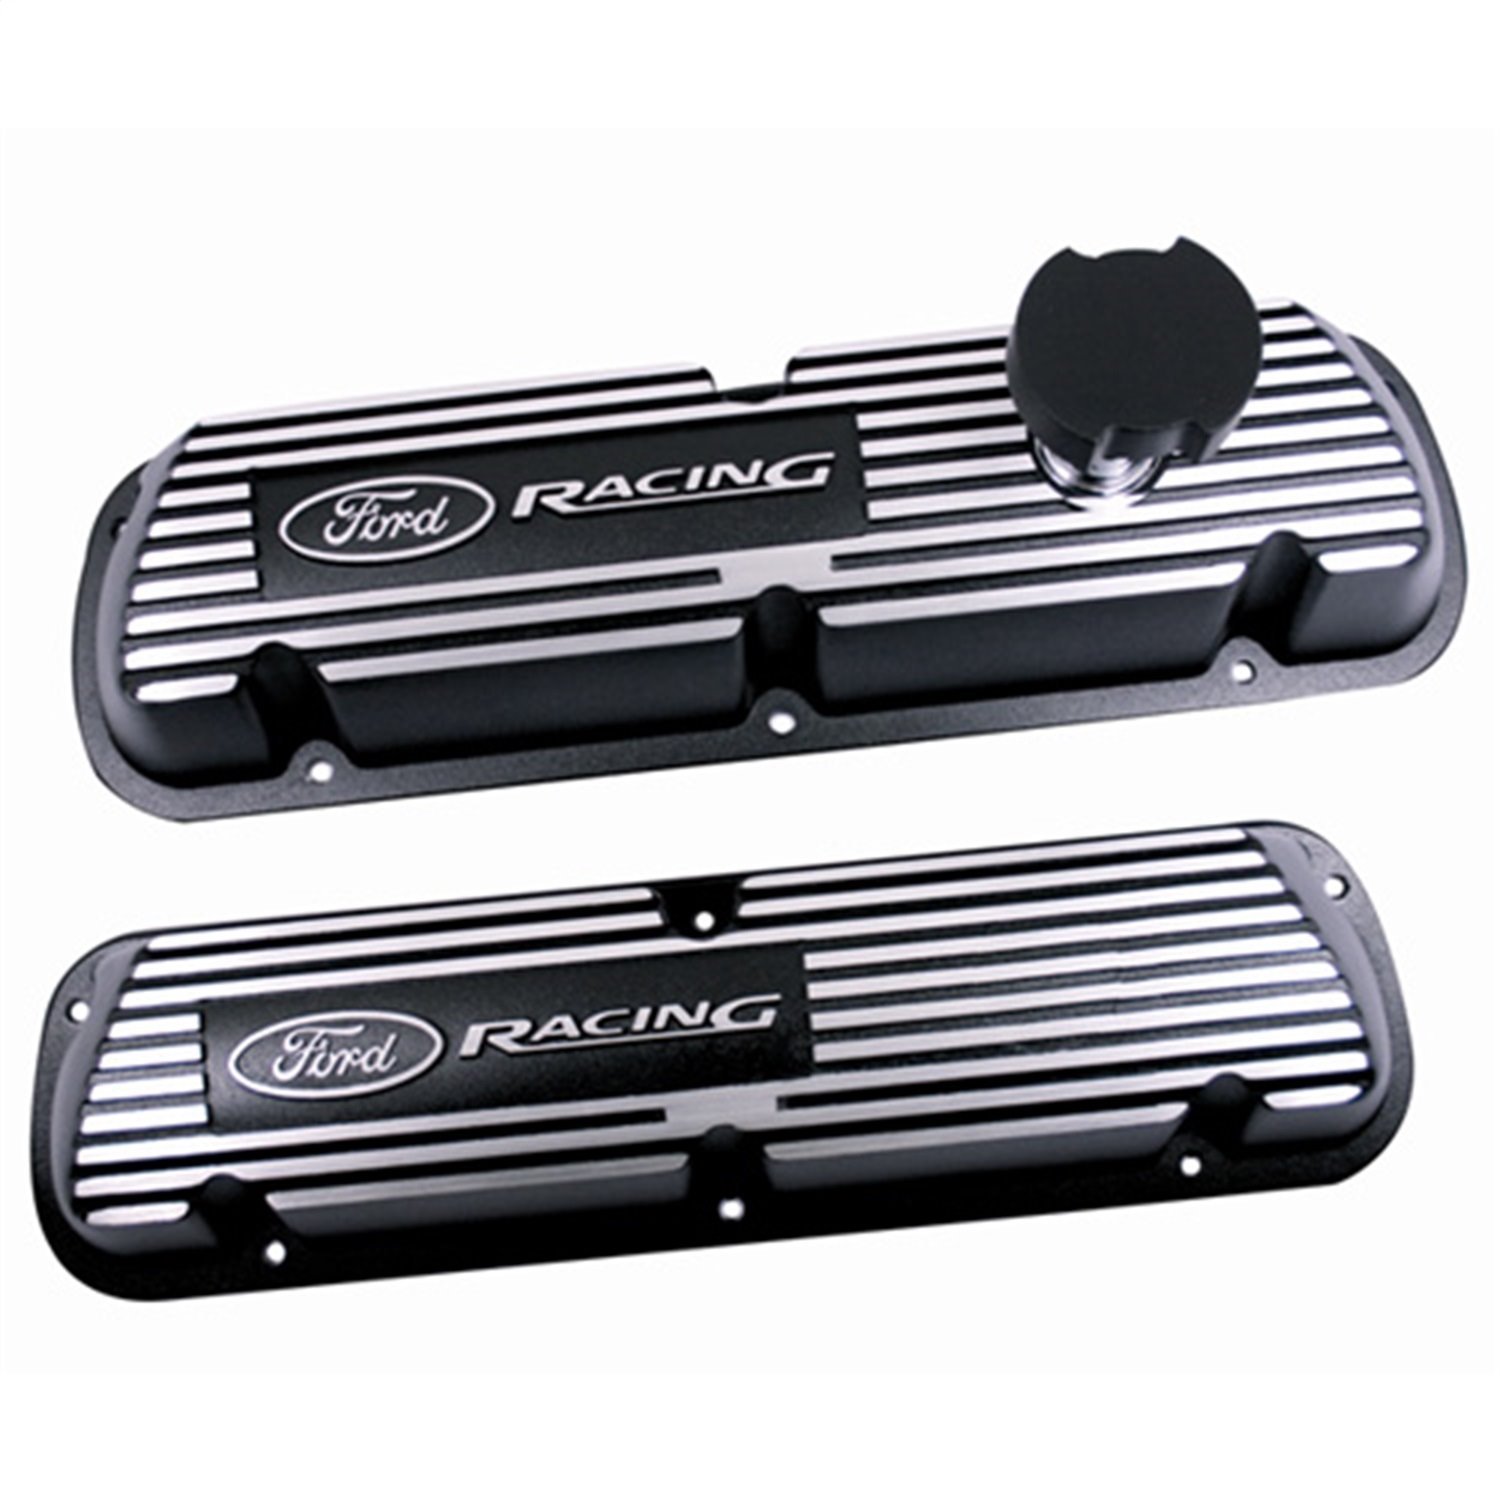 Ford racing valve cover decal #5